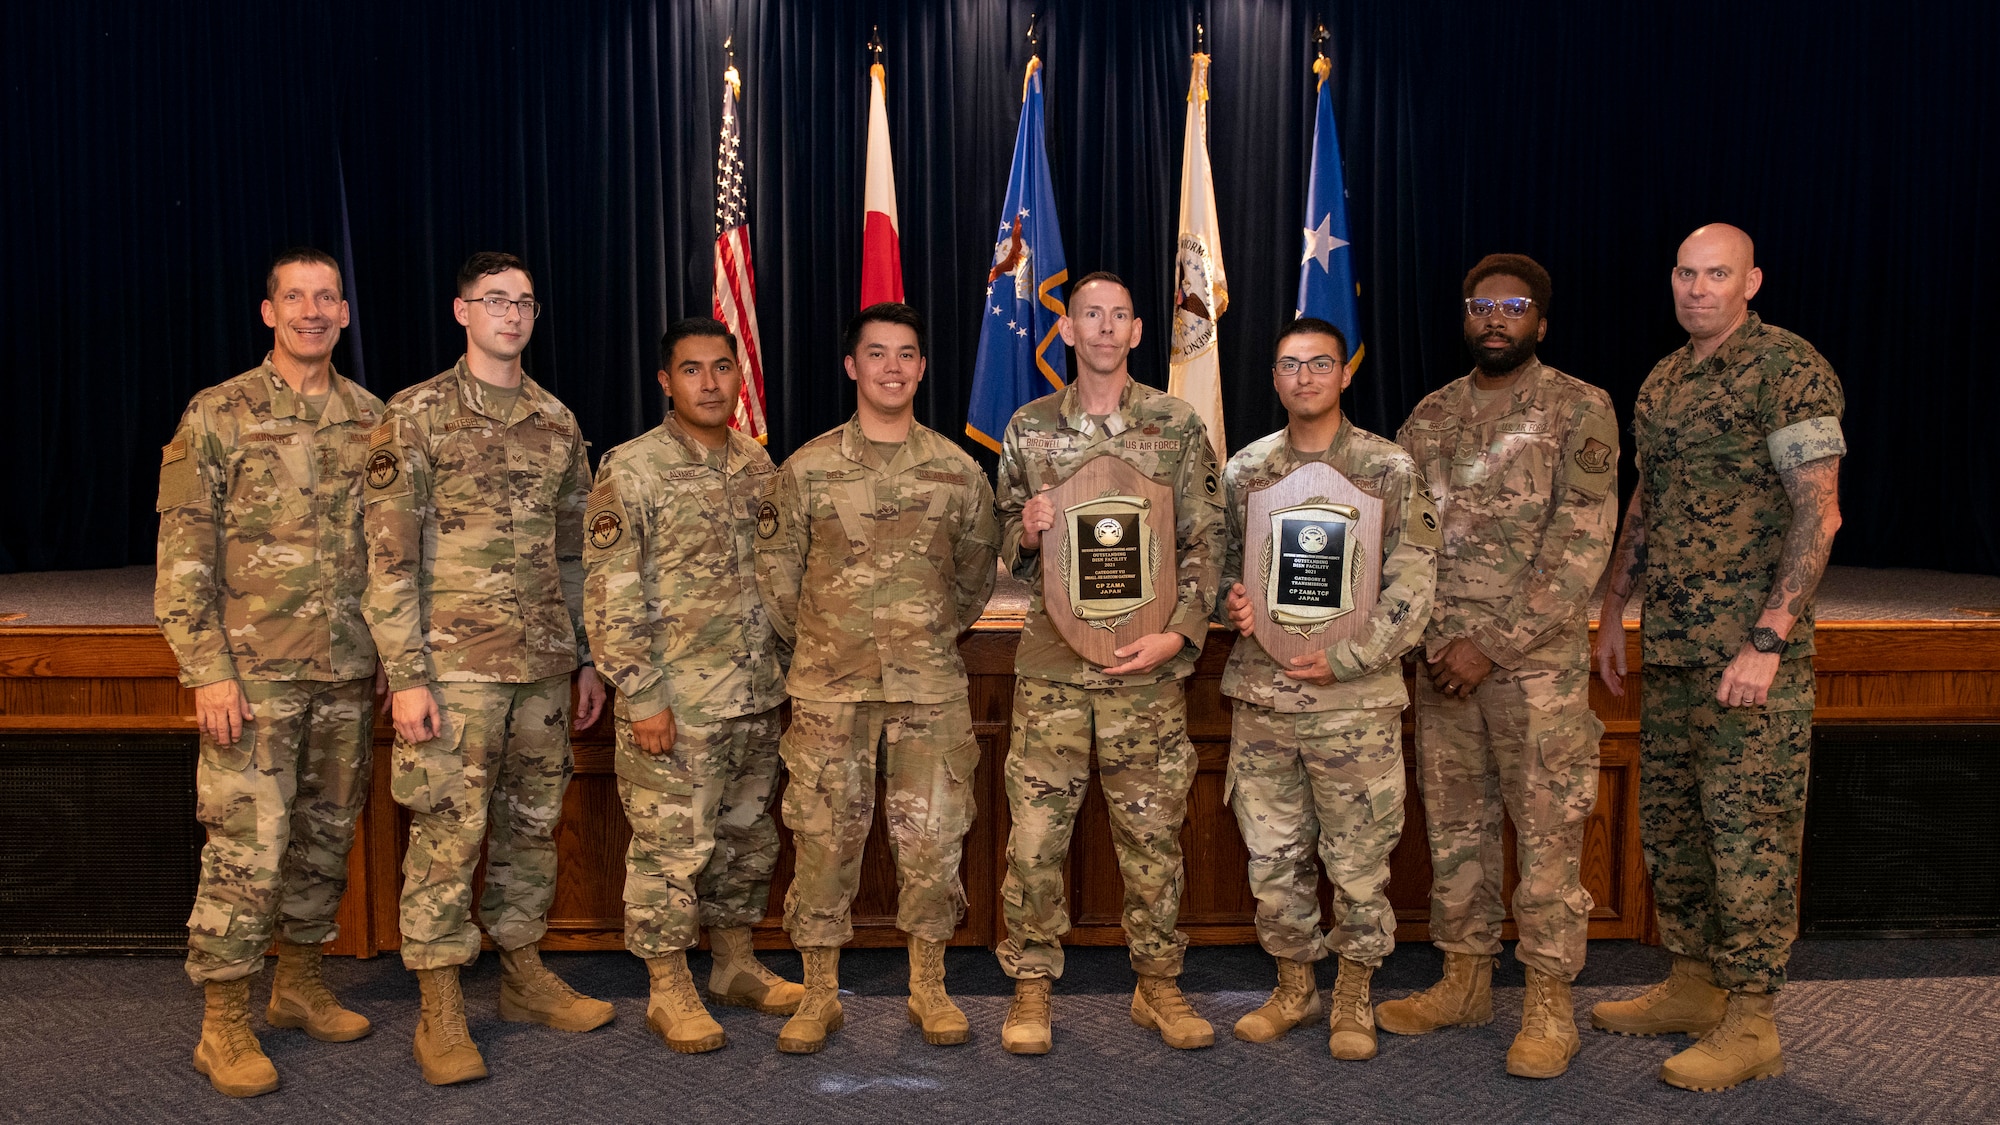 Eight military uniformed men stand next to each other while two of them hold up large wooden award plaques.